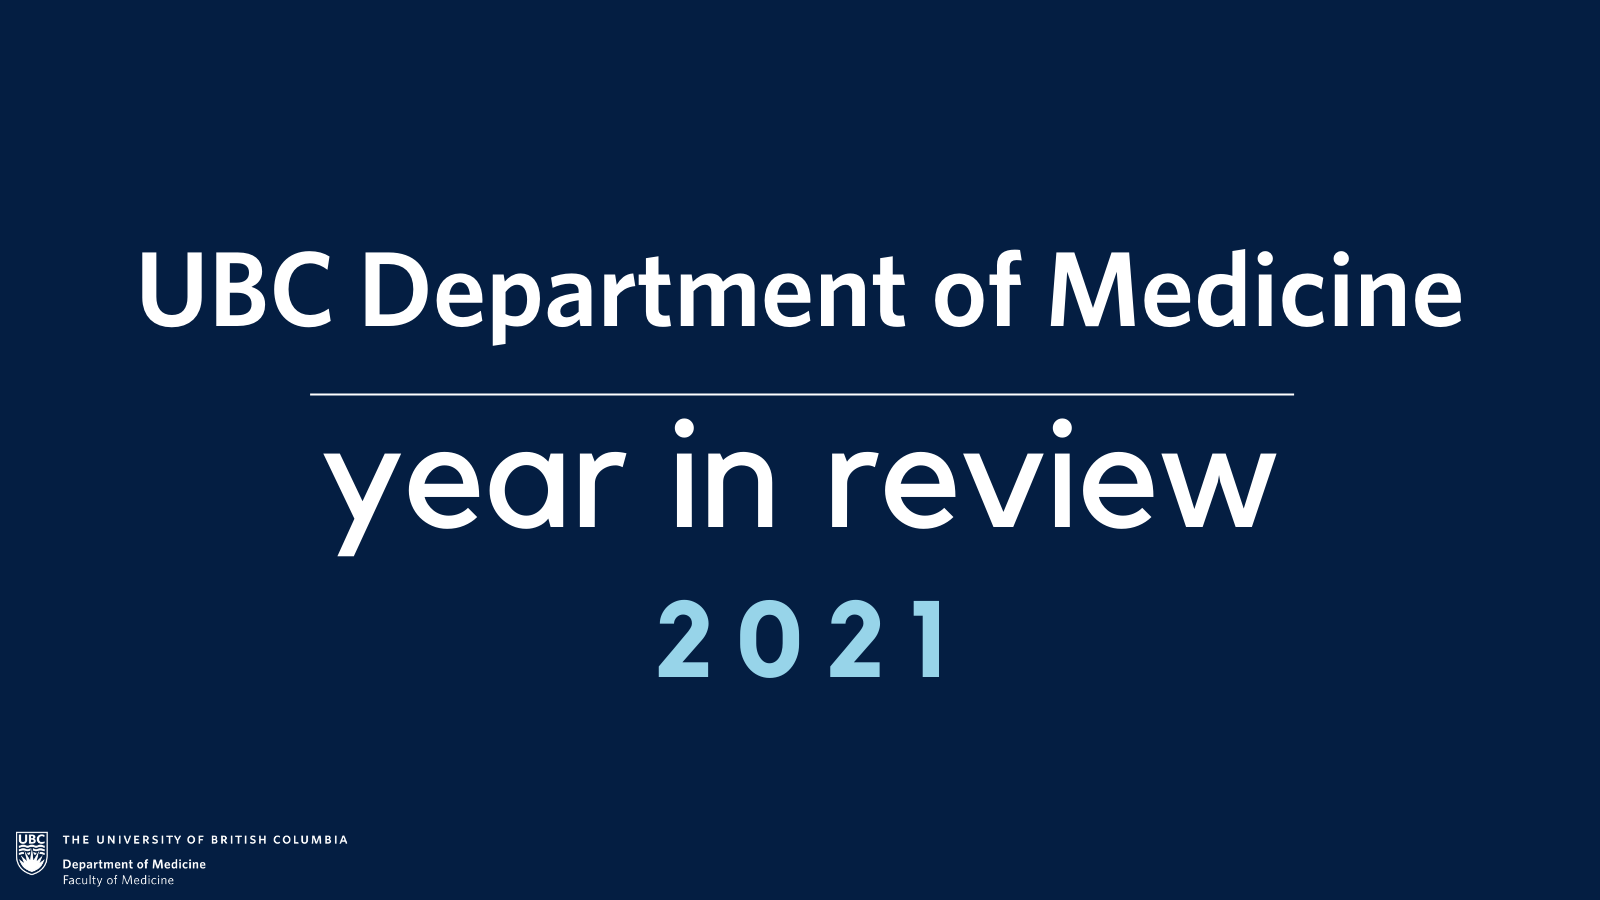 UBC Department of Medicine Year in Review: 2021